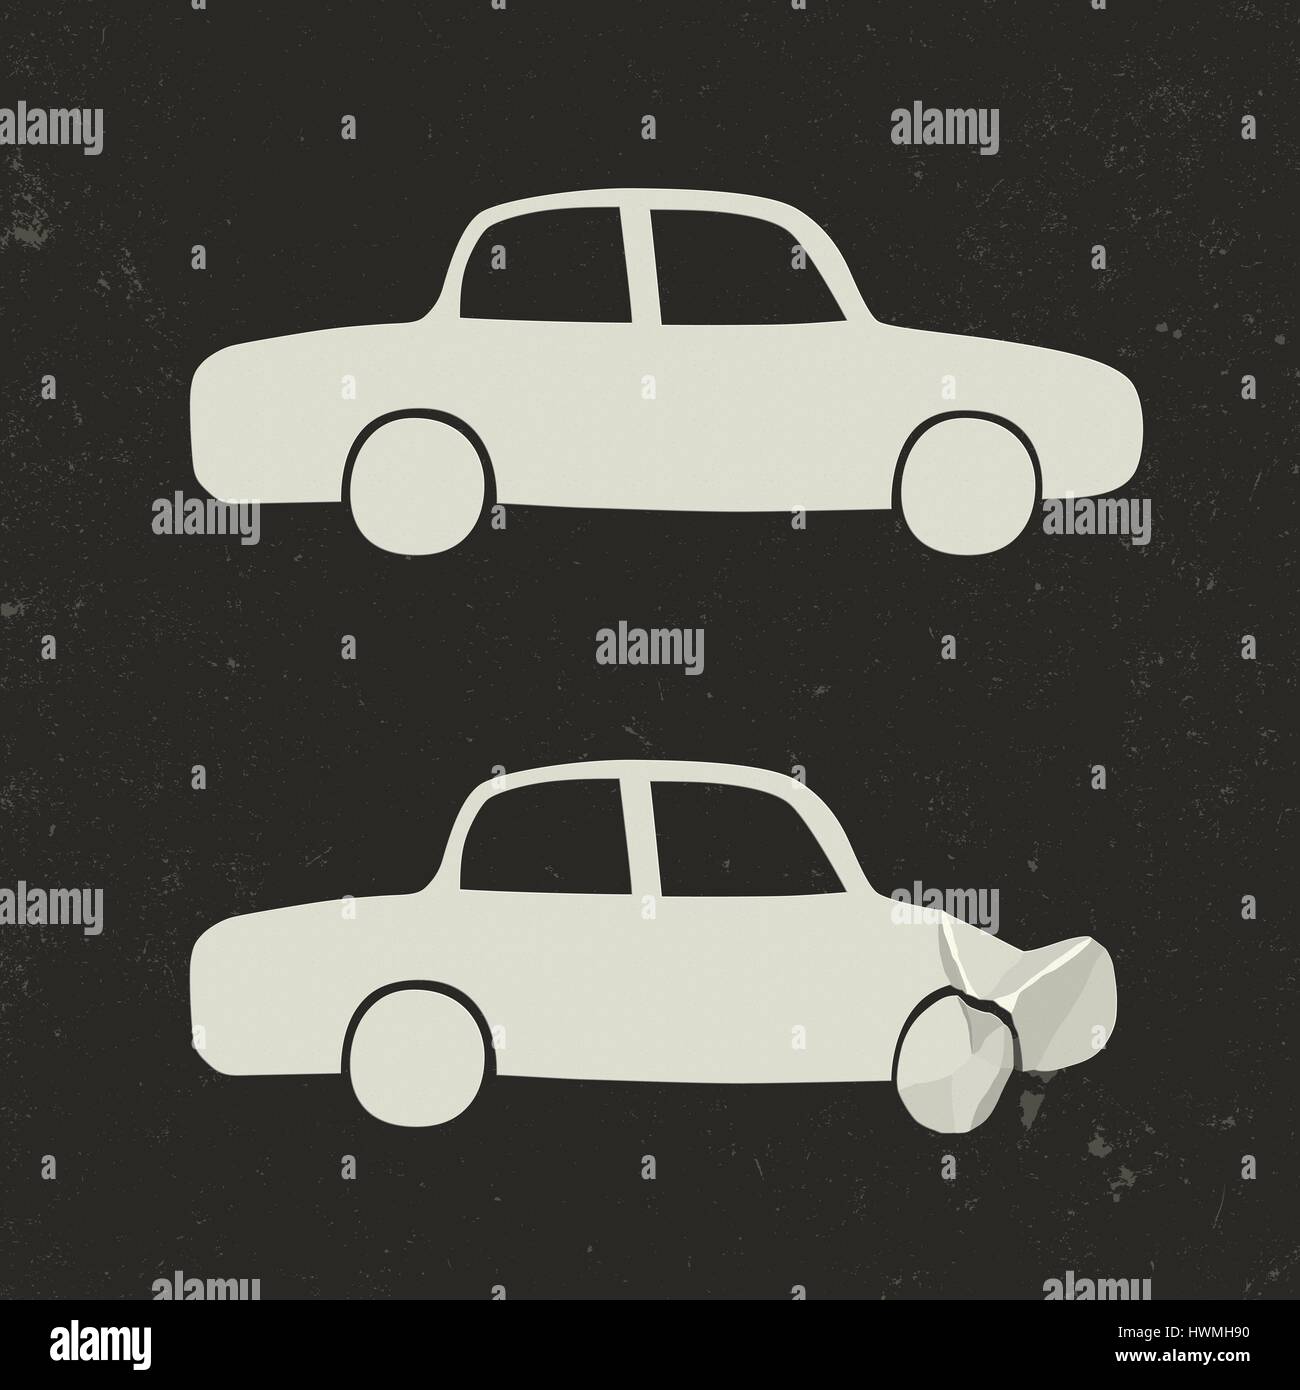 Car accident. Stock Vector